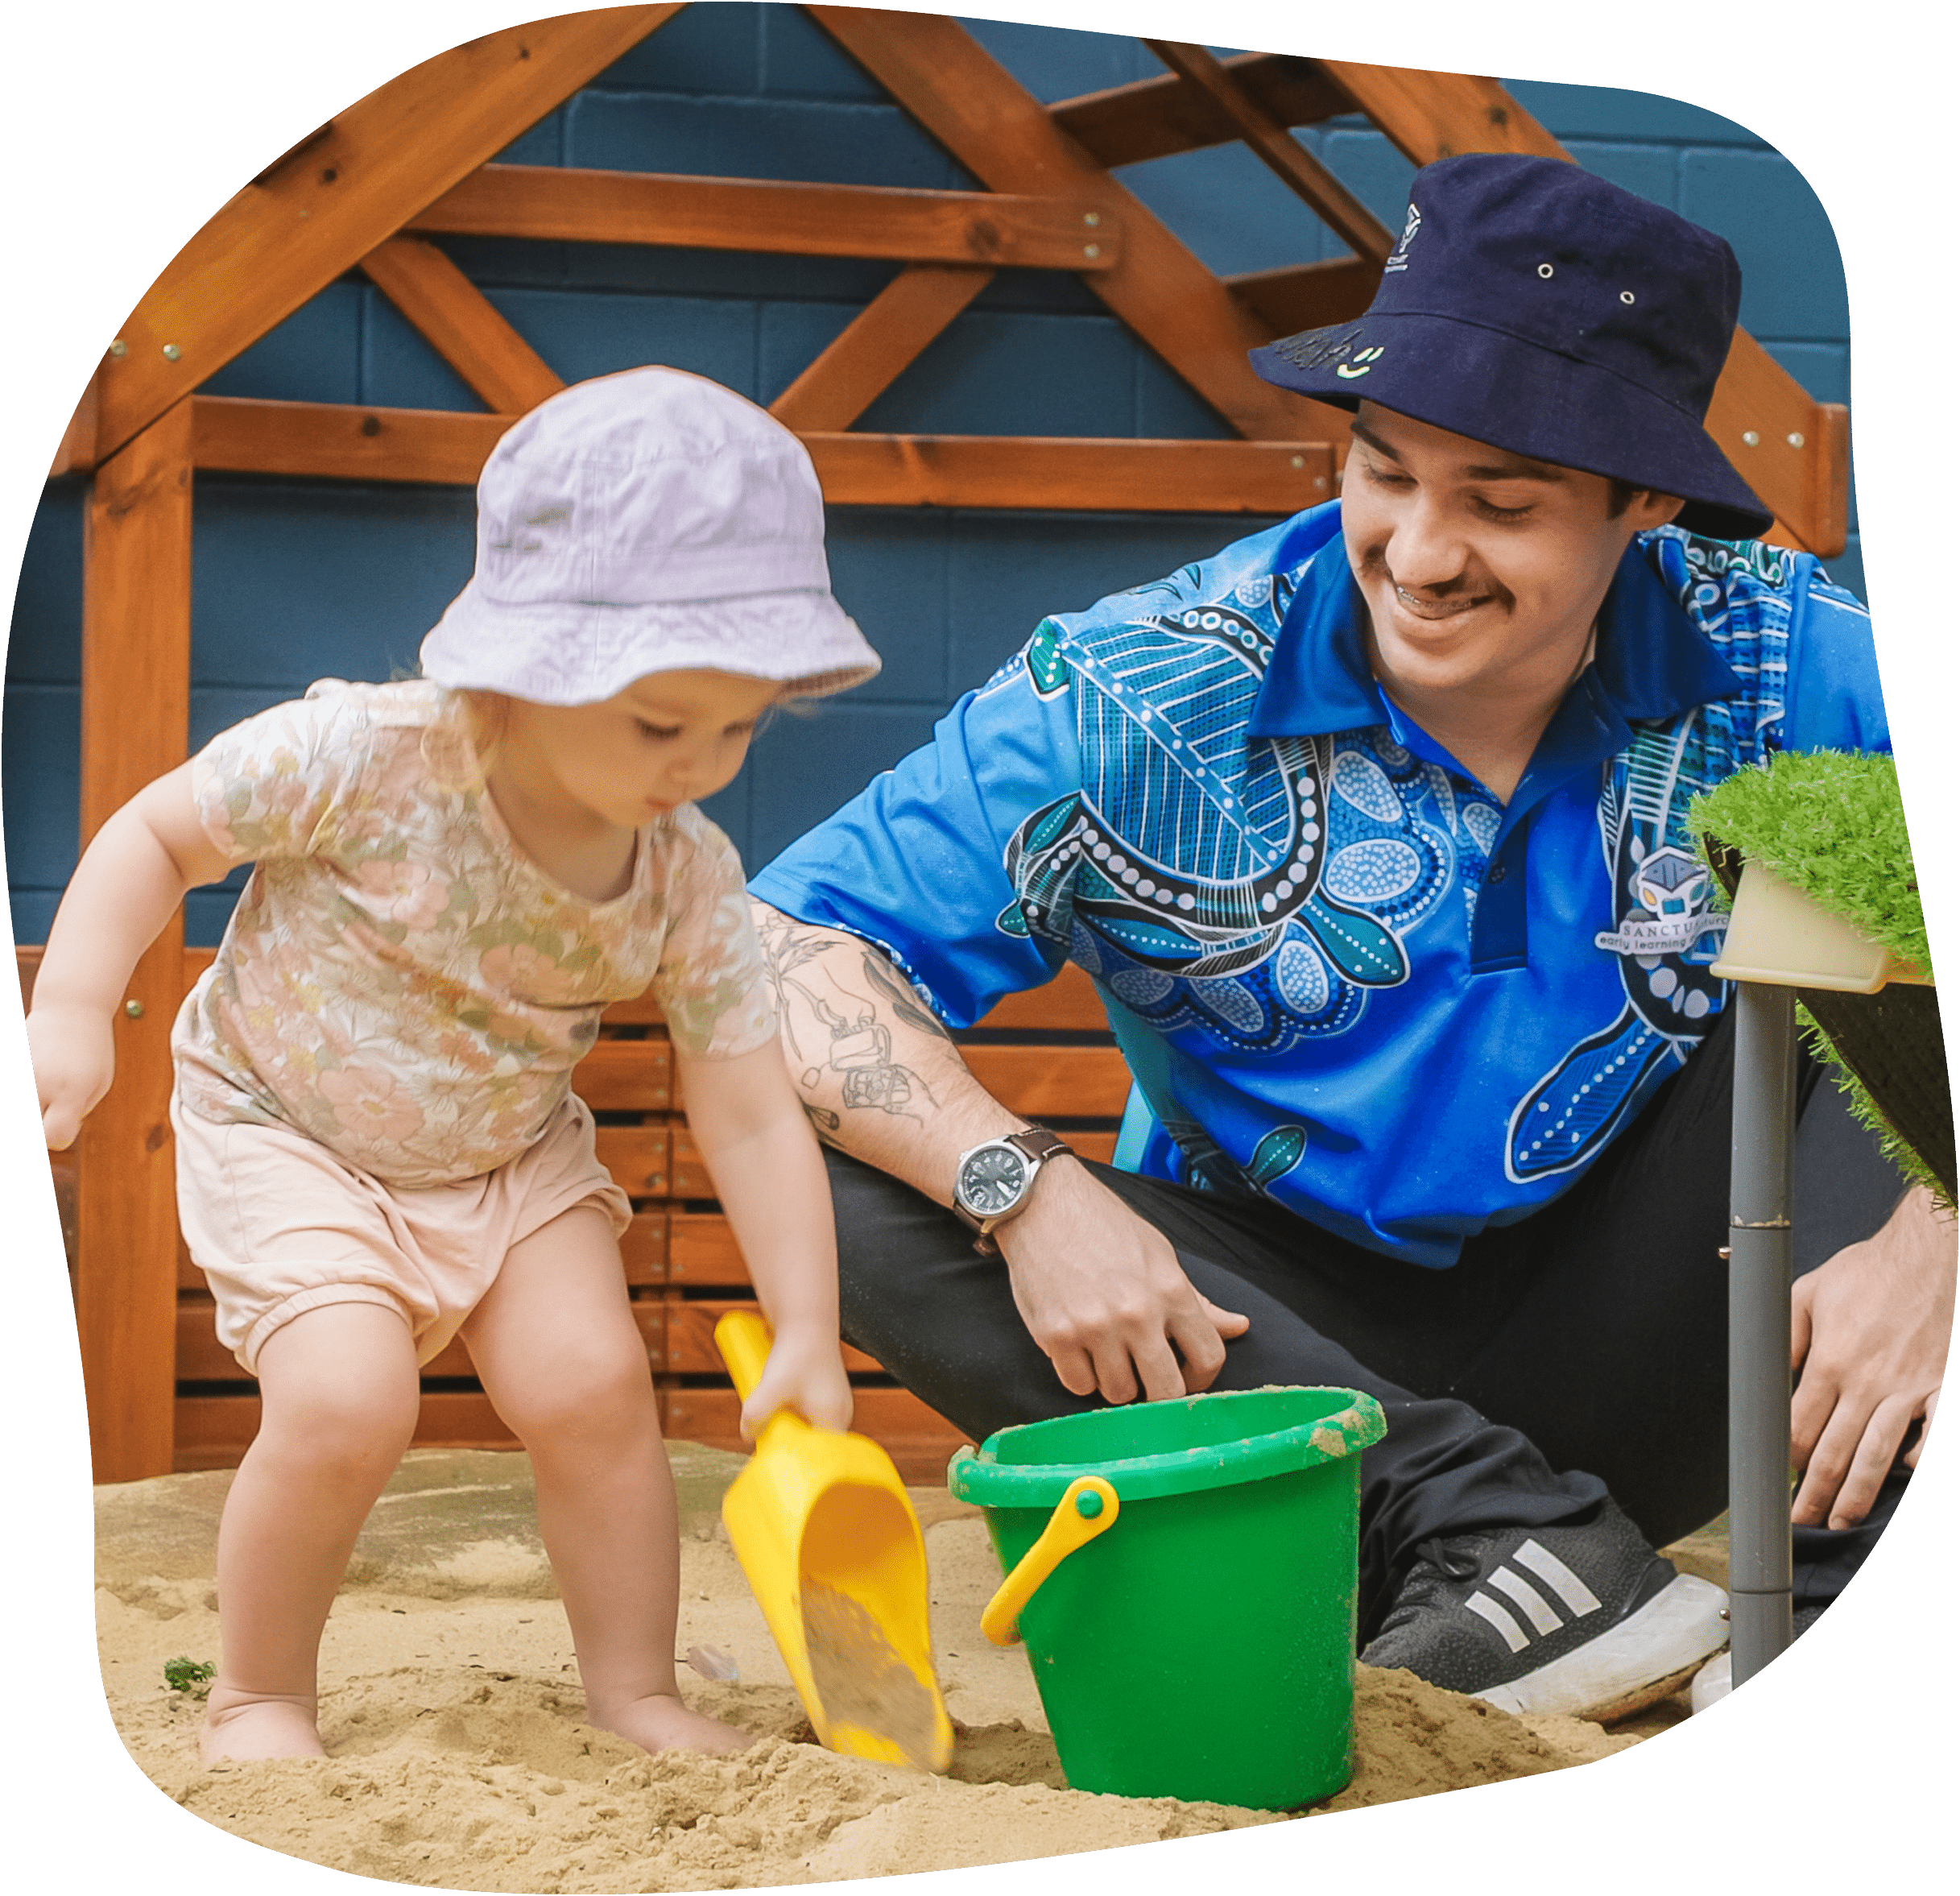 Early learning staff member playing in sand with young child